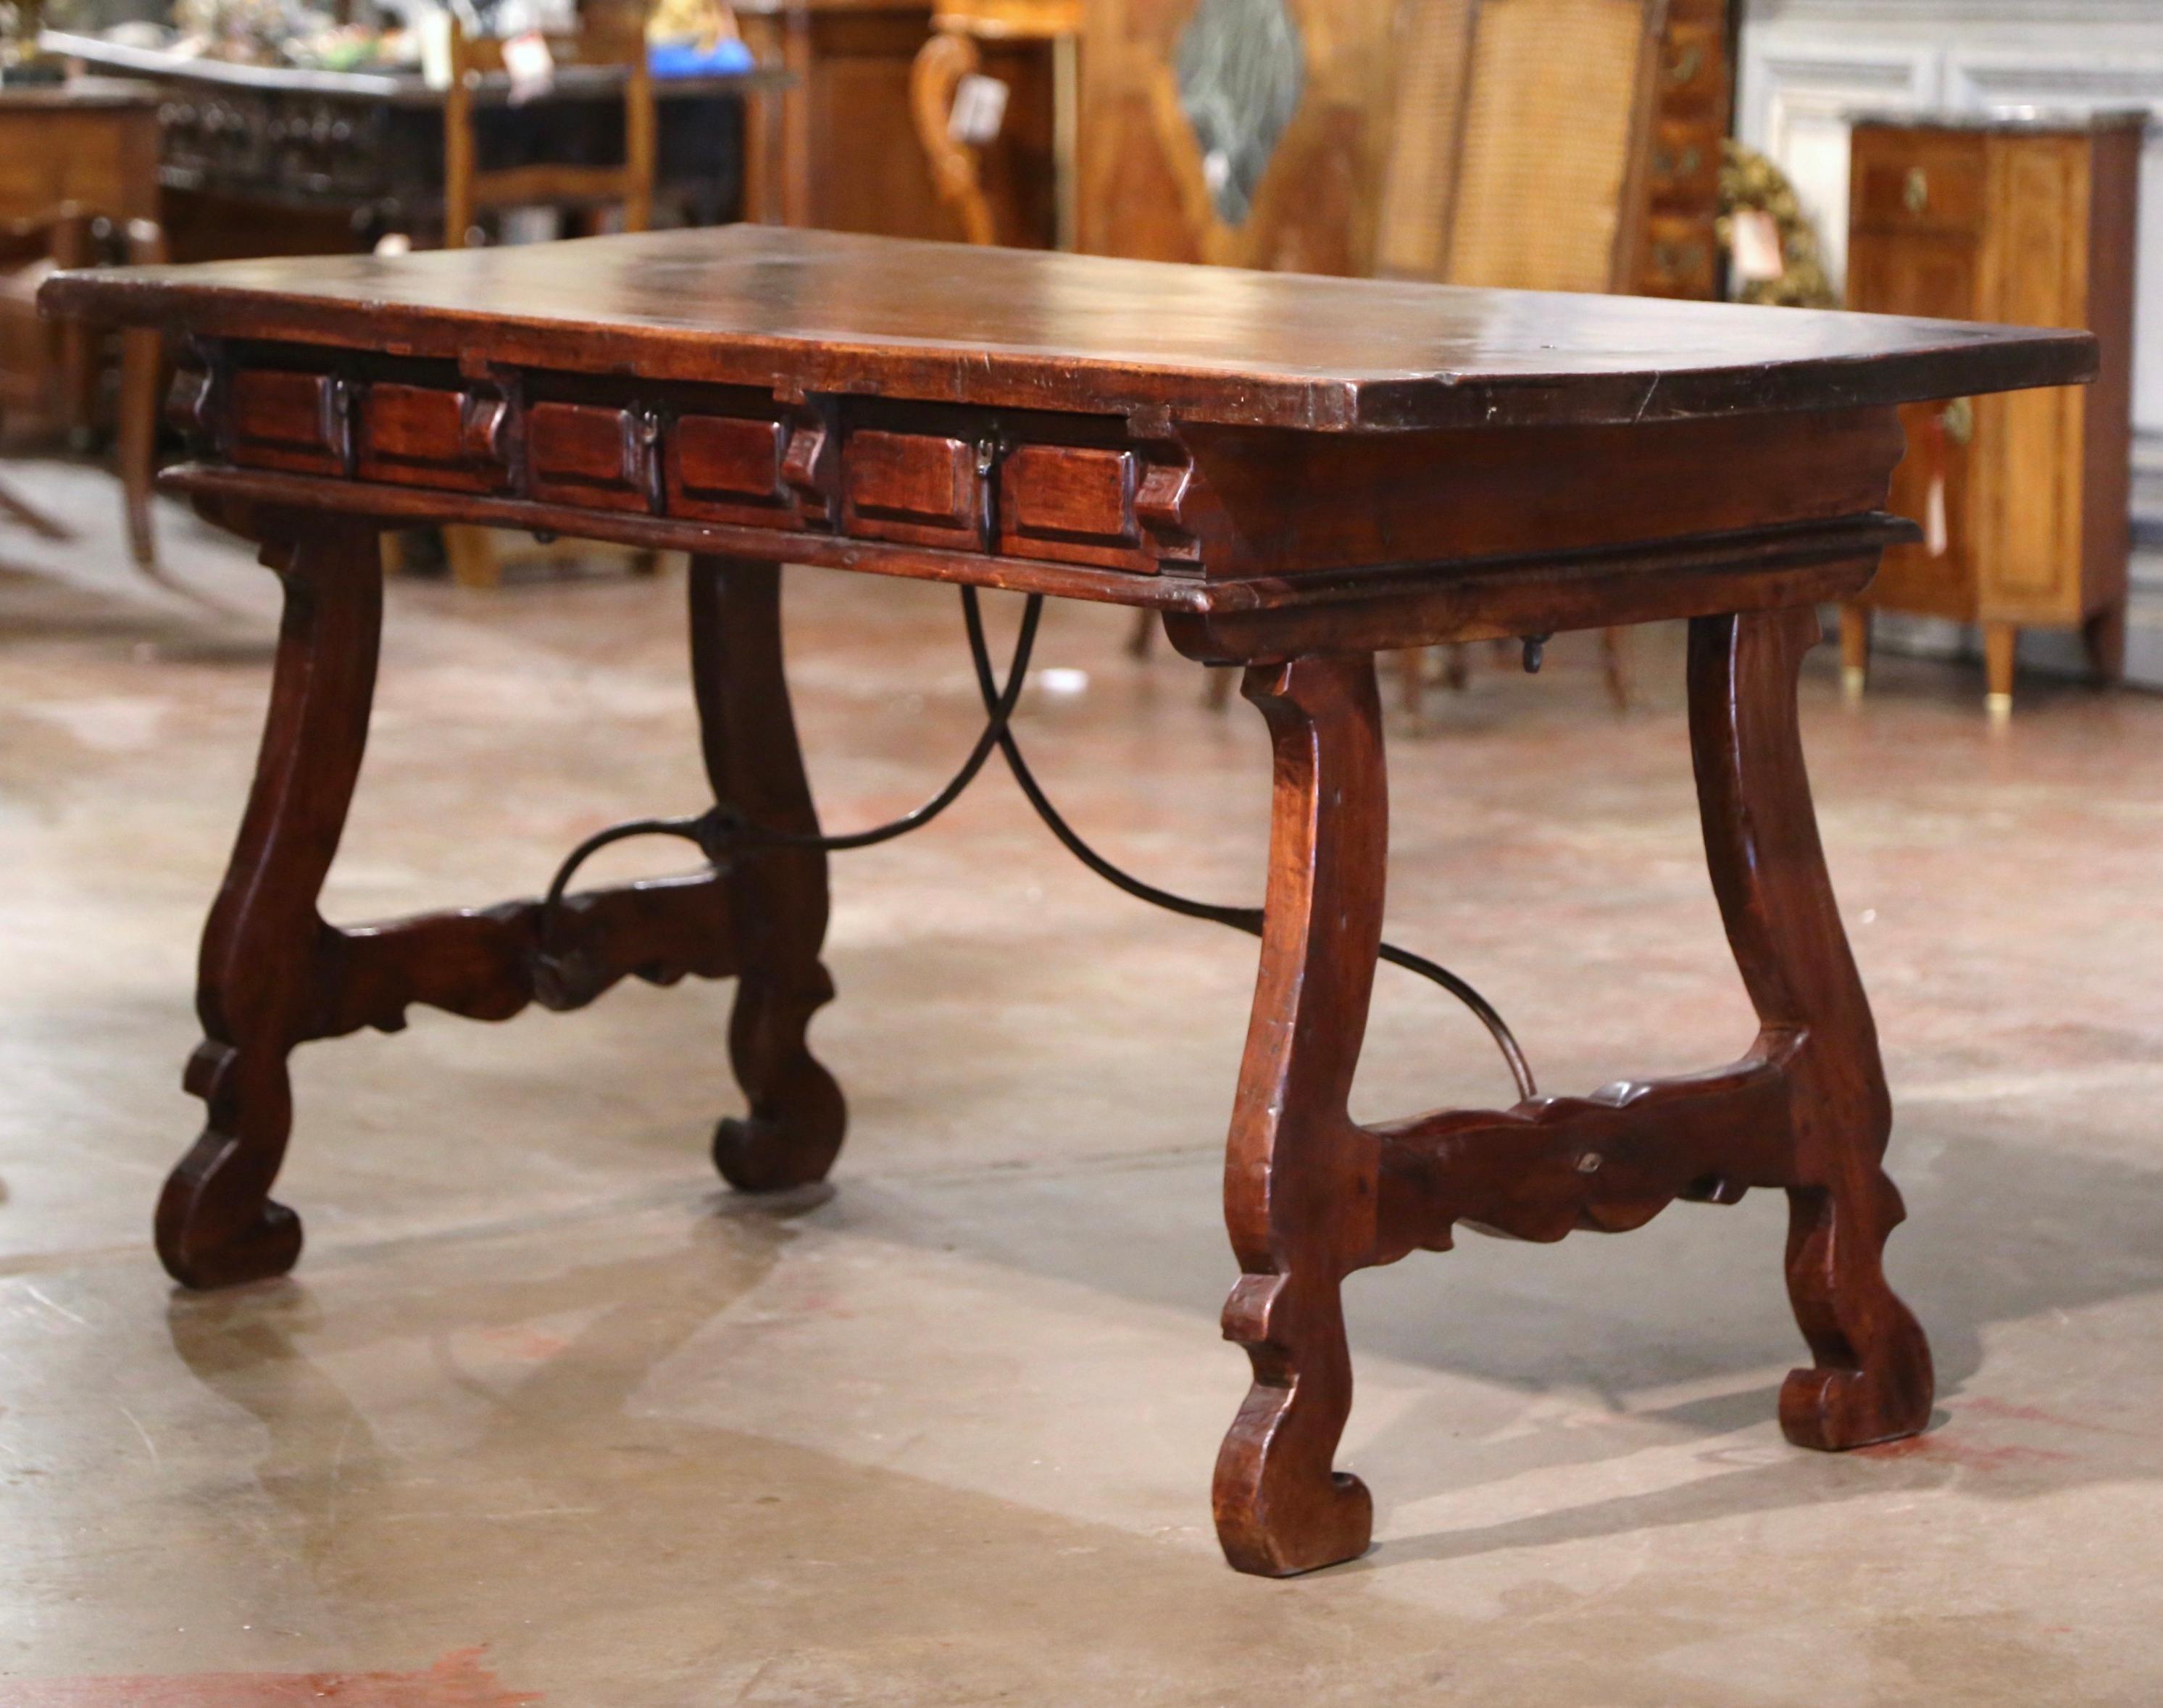 Add an elegant focal point to your study or library with this antique Spanish desk. Carved in Spain circa 1850, the trestle table stands on two intricate carved legs, connected with a thick, forged wrought iron stretcher. The top built with one